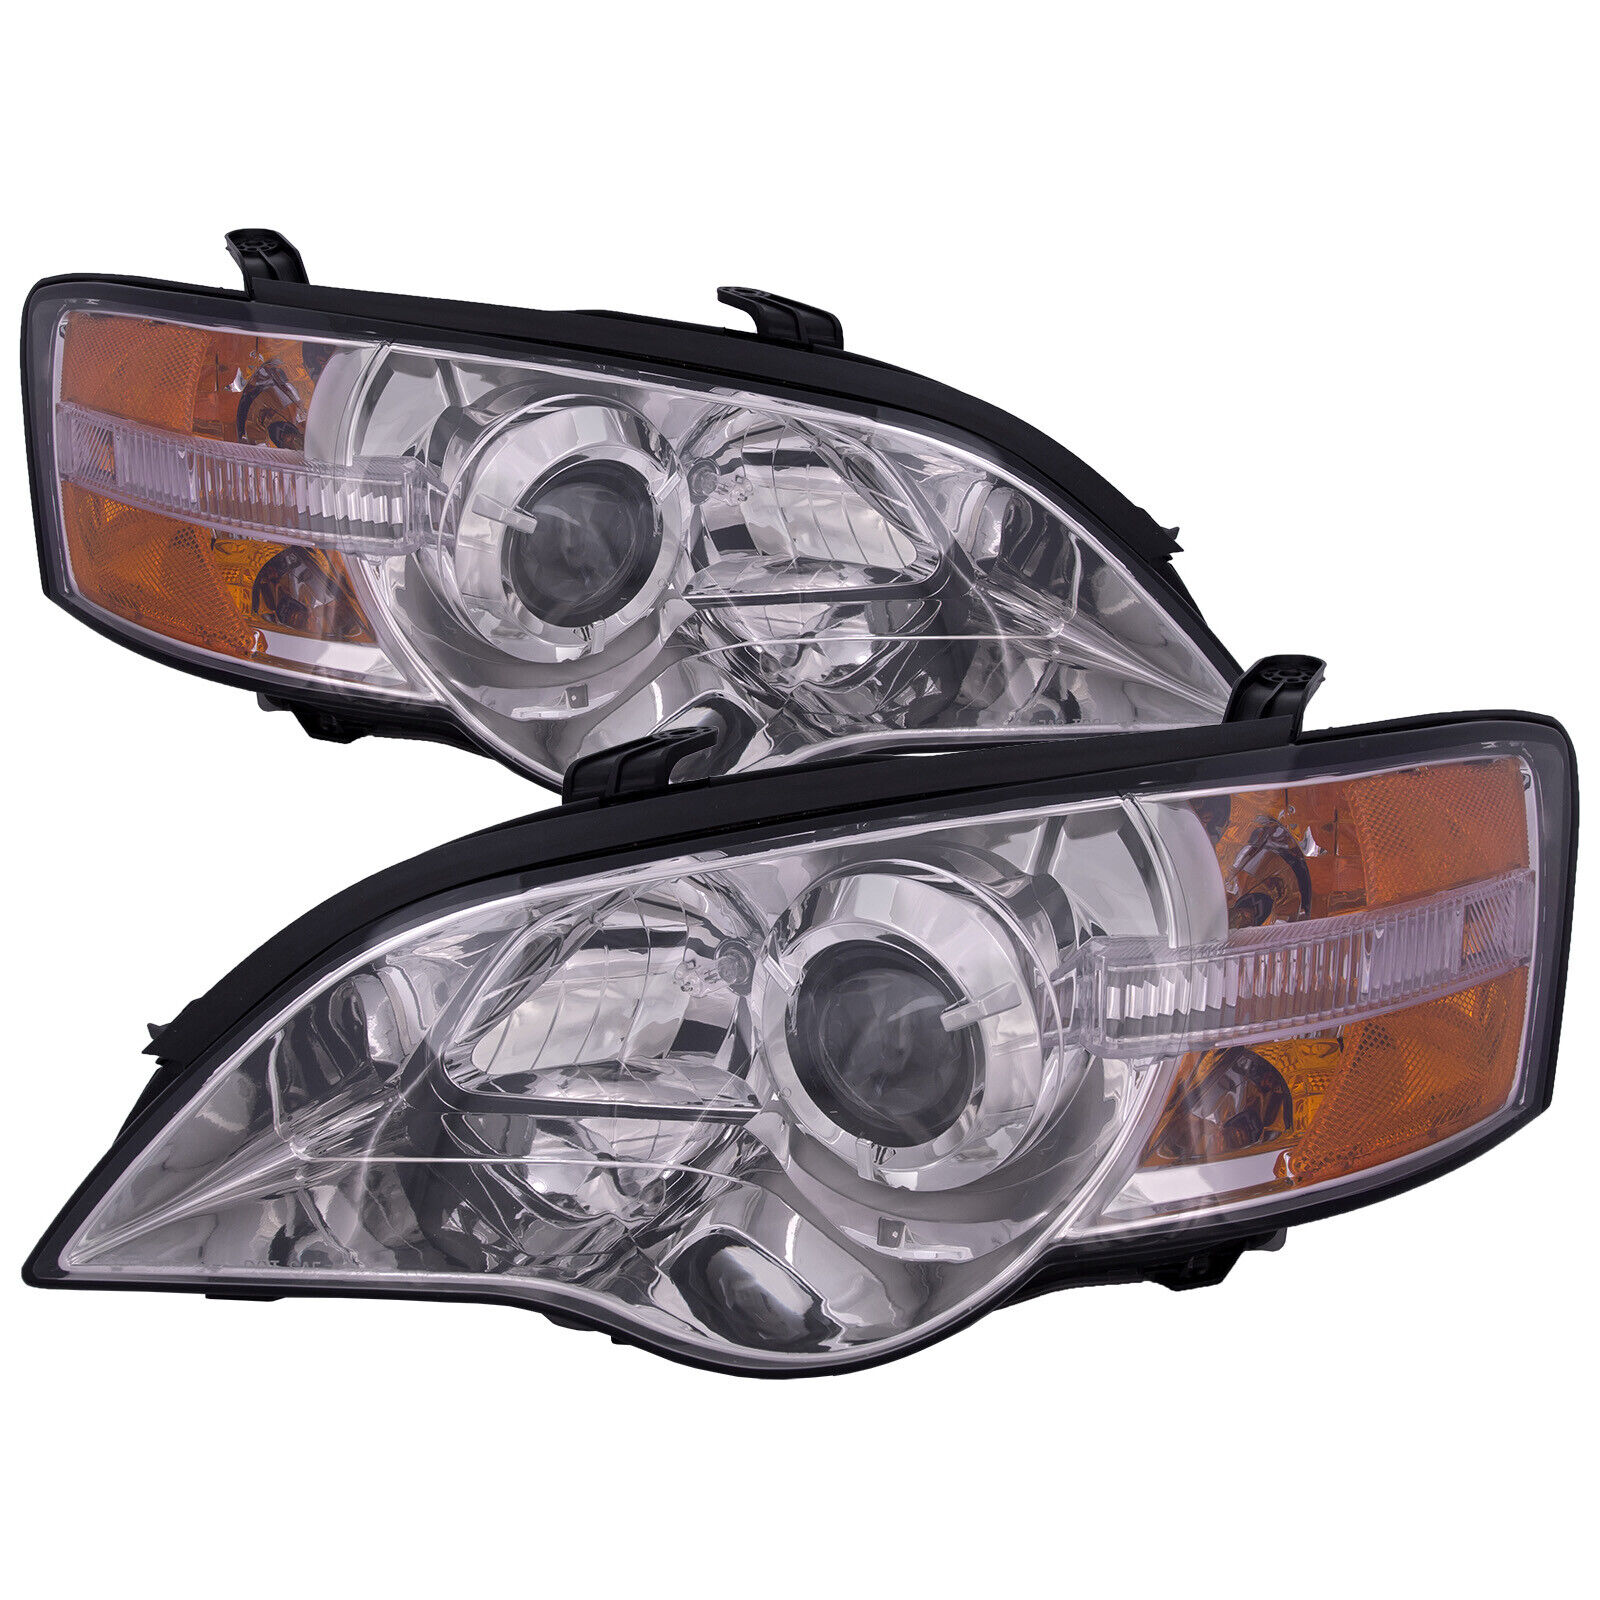 Headlights For 2005-2007 Subaru Legacy And Outback Chrome Performance Lamp Pair